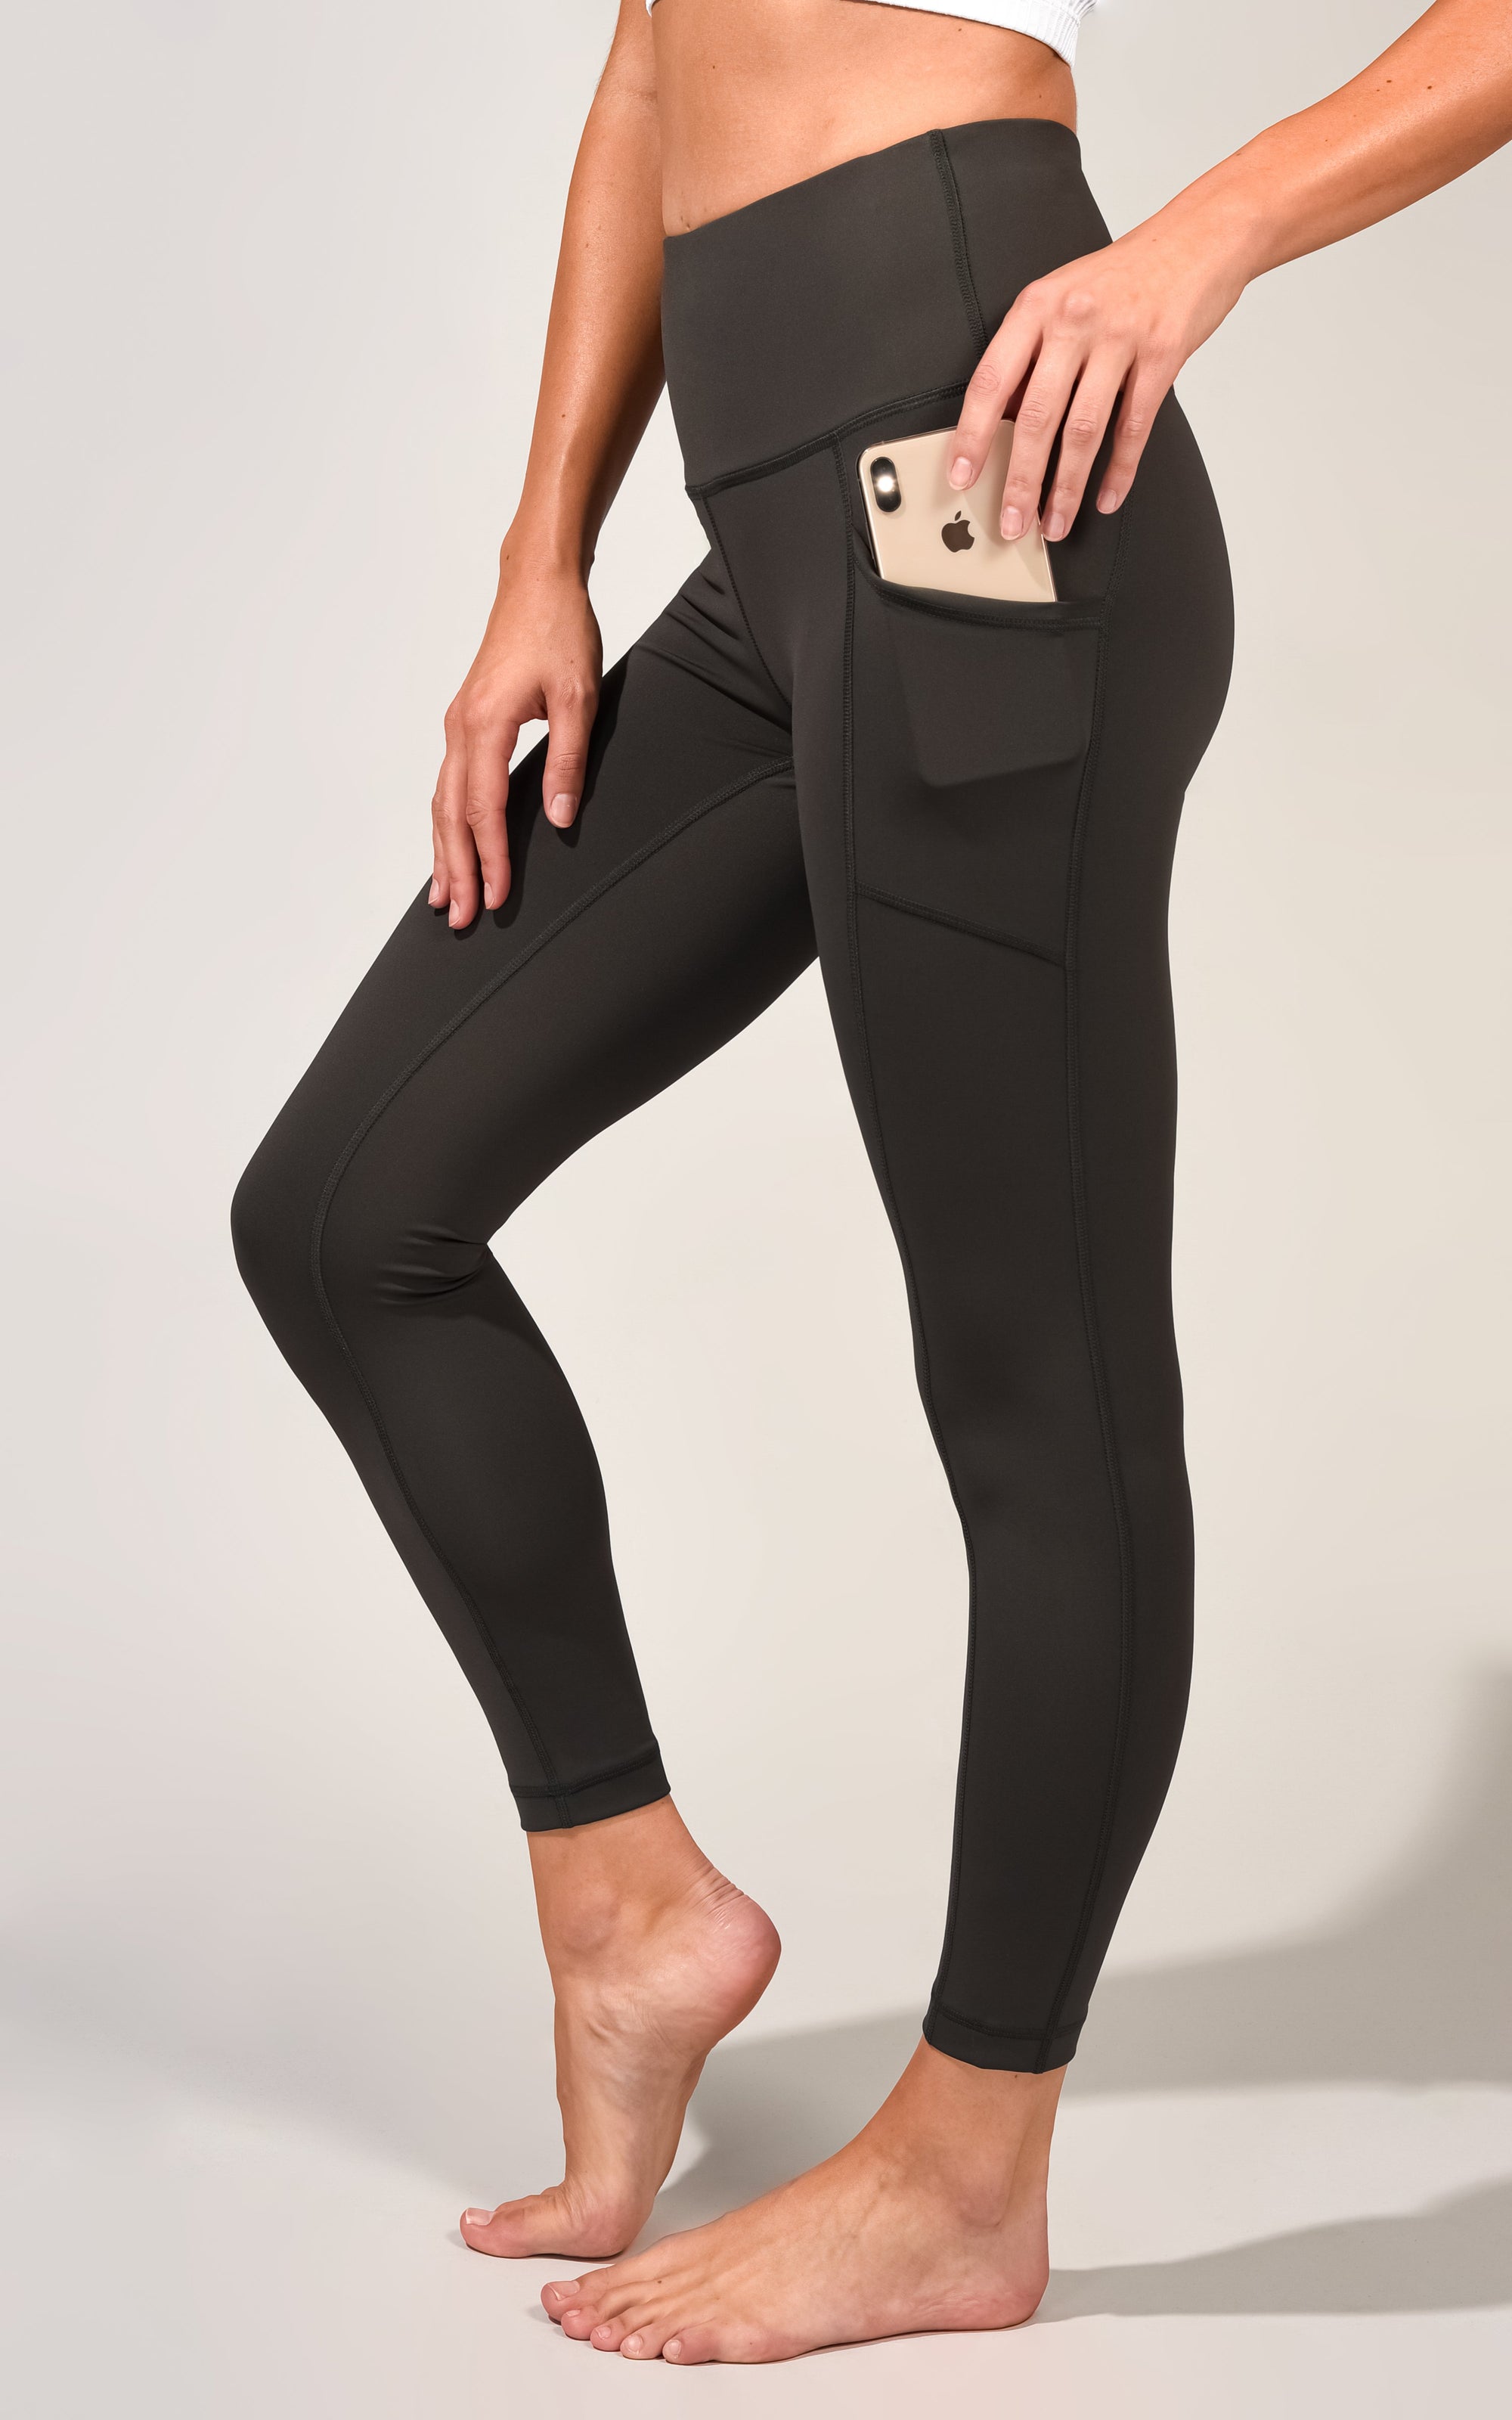 The Essential Sports Leggings Guide | Next UK